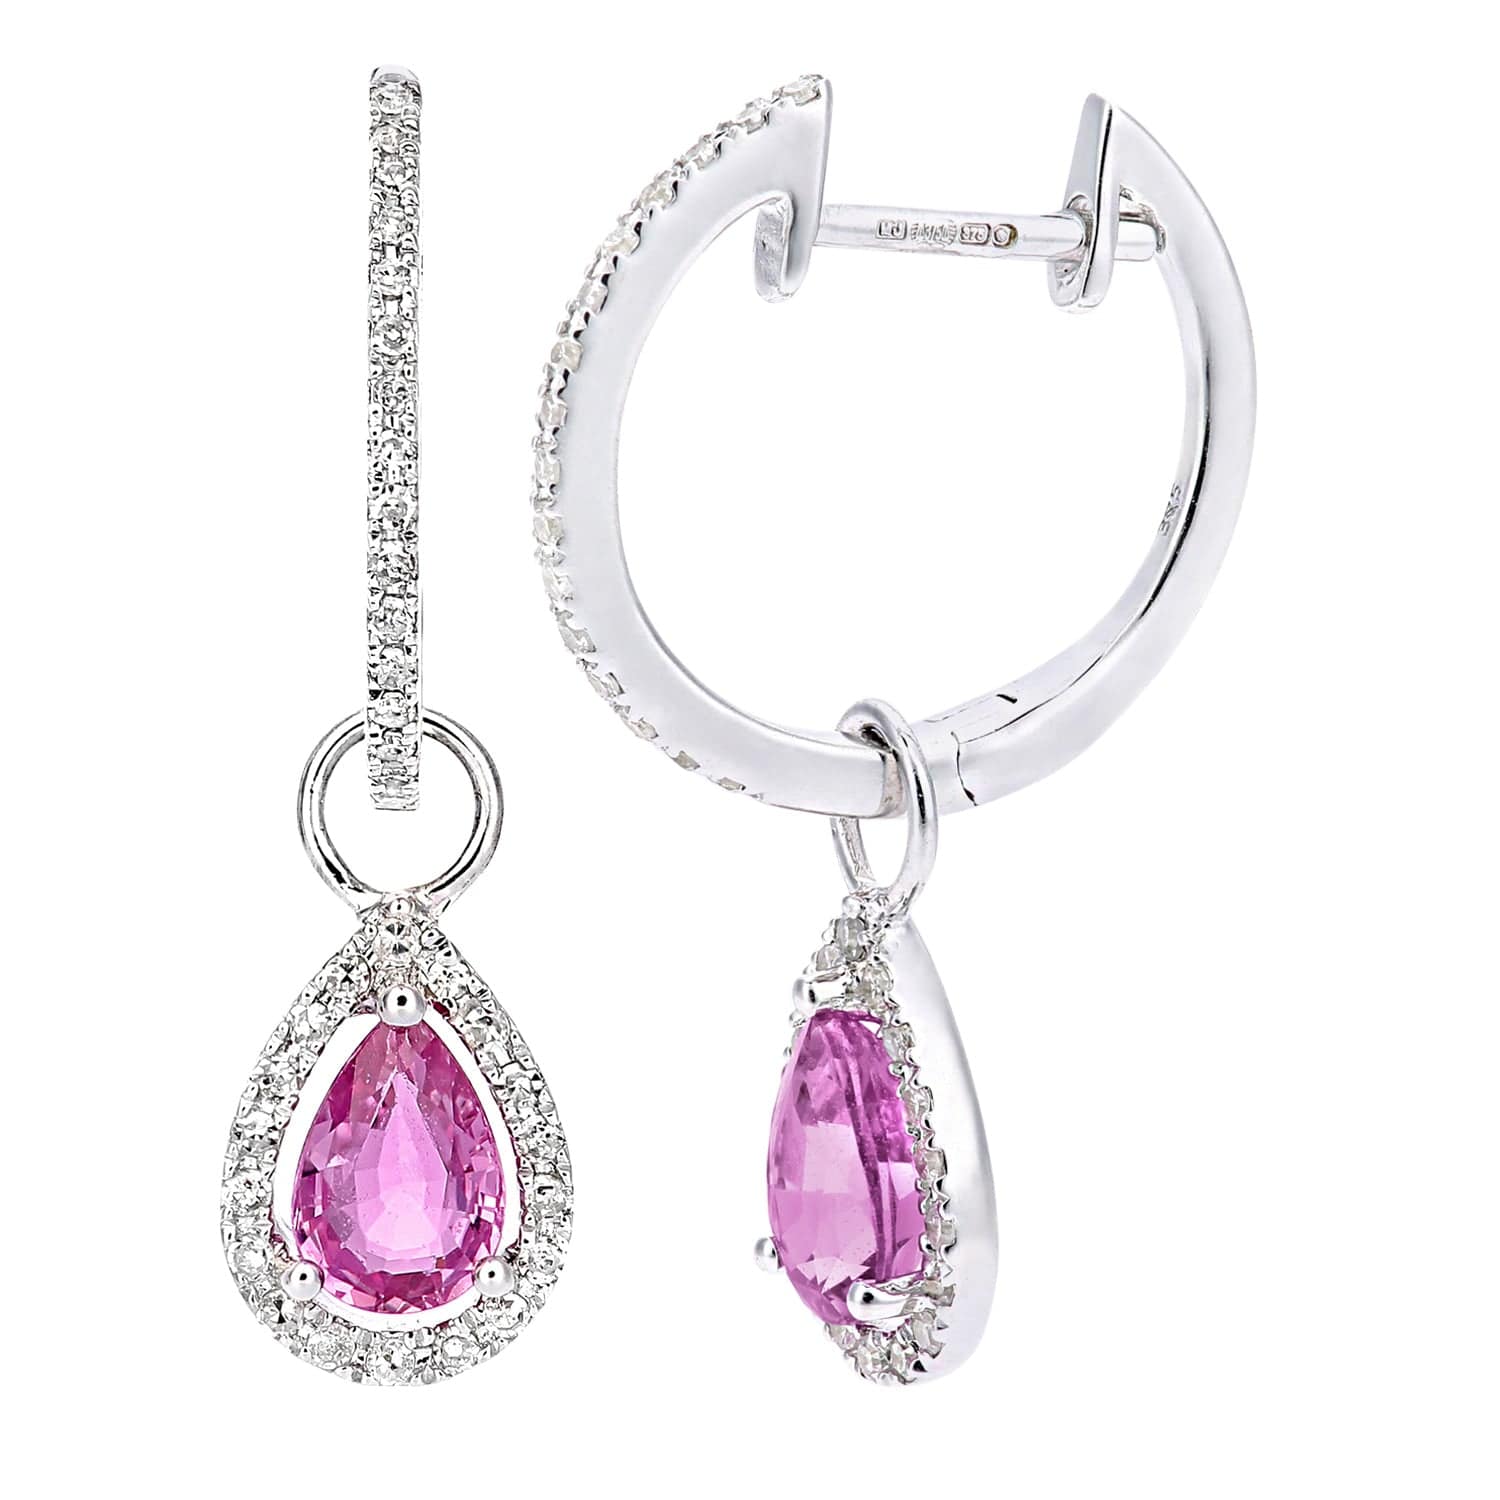 Lynora Luxe Earring White Gold 9ct / Pink Sapphire 9ct White Gold Created Pink Sapphire Teardrop and Diamond Halo Earrings